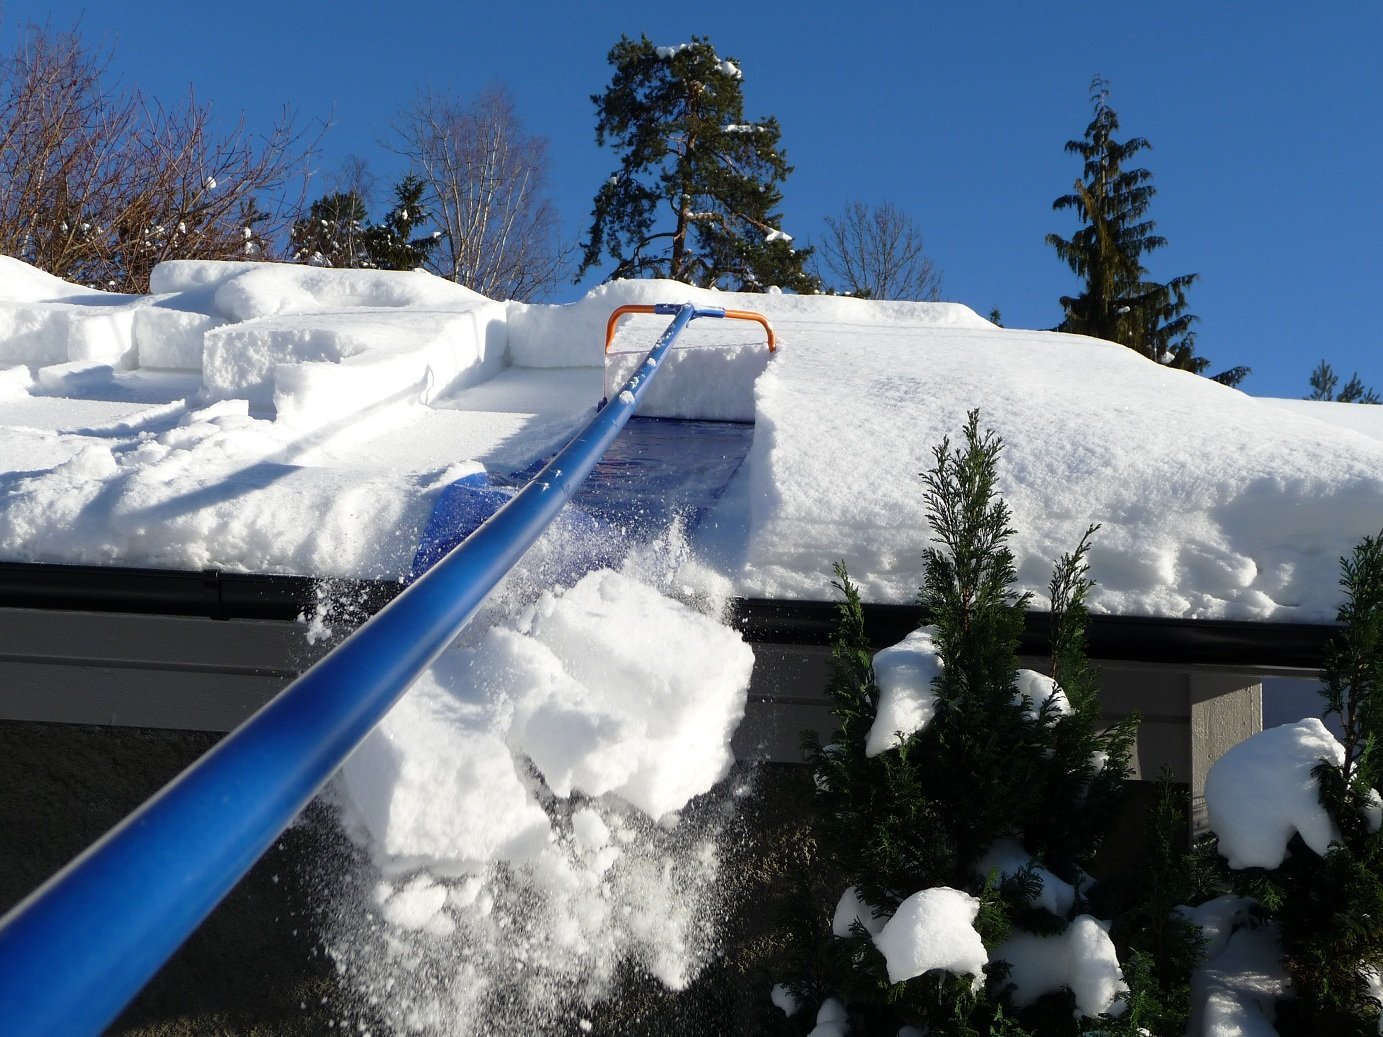 Avalanche - Original Roof Snow Removal System